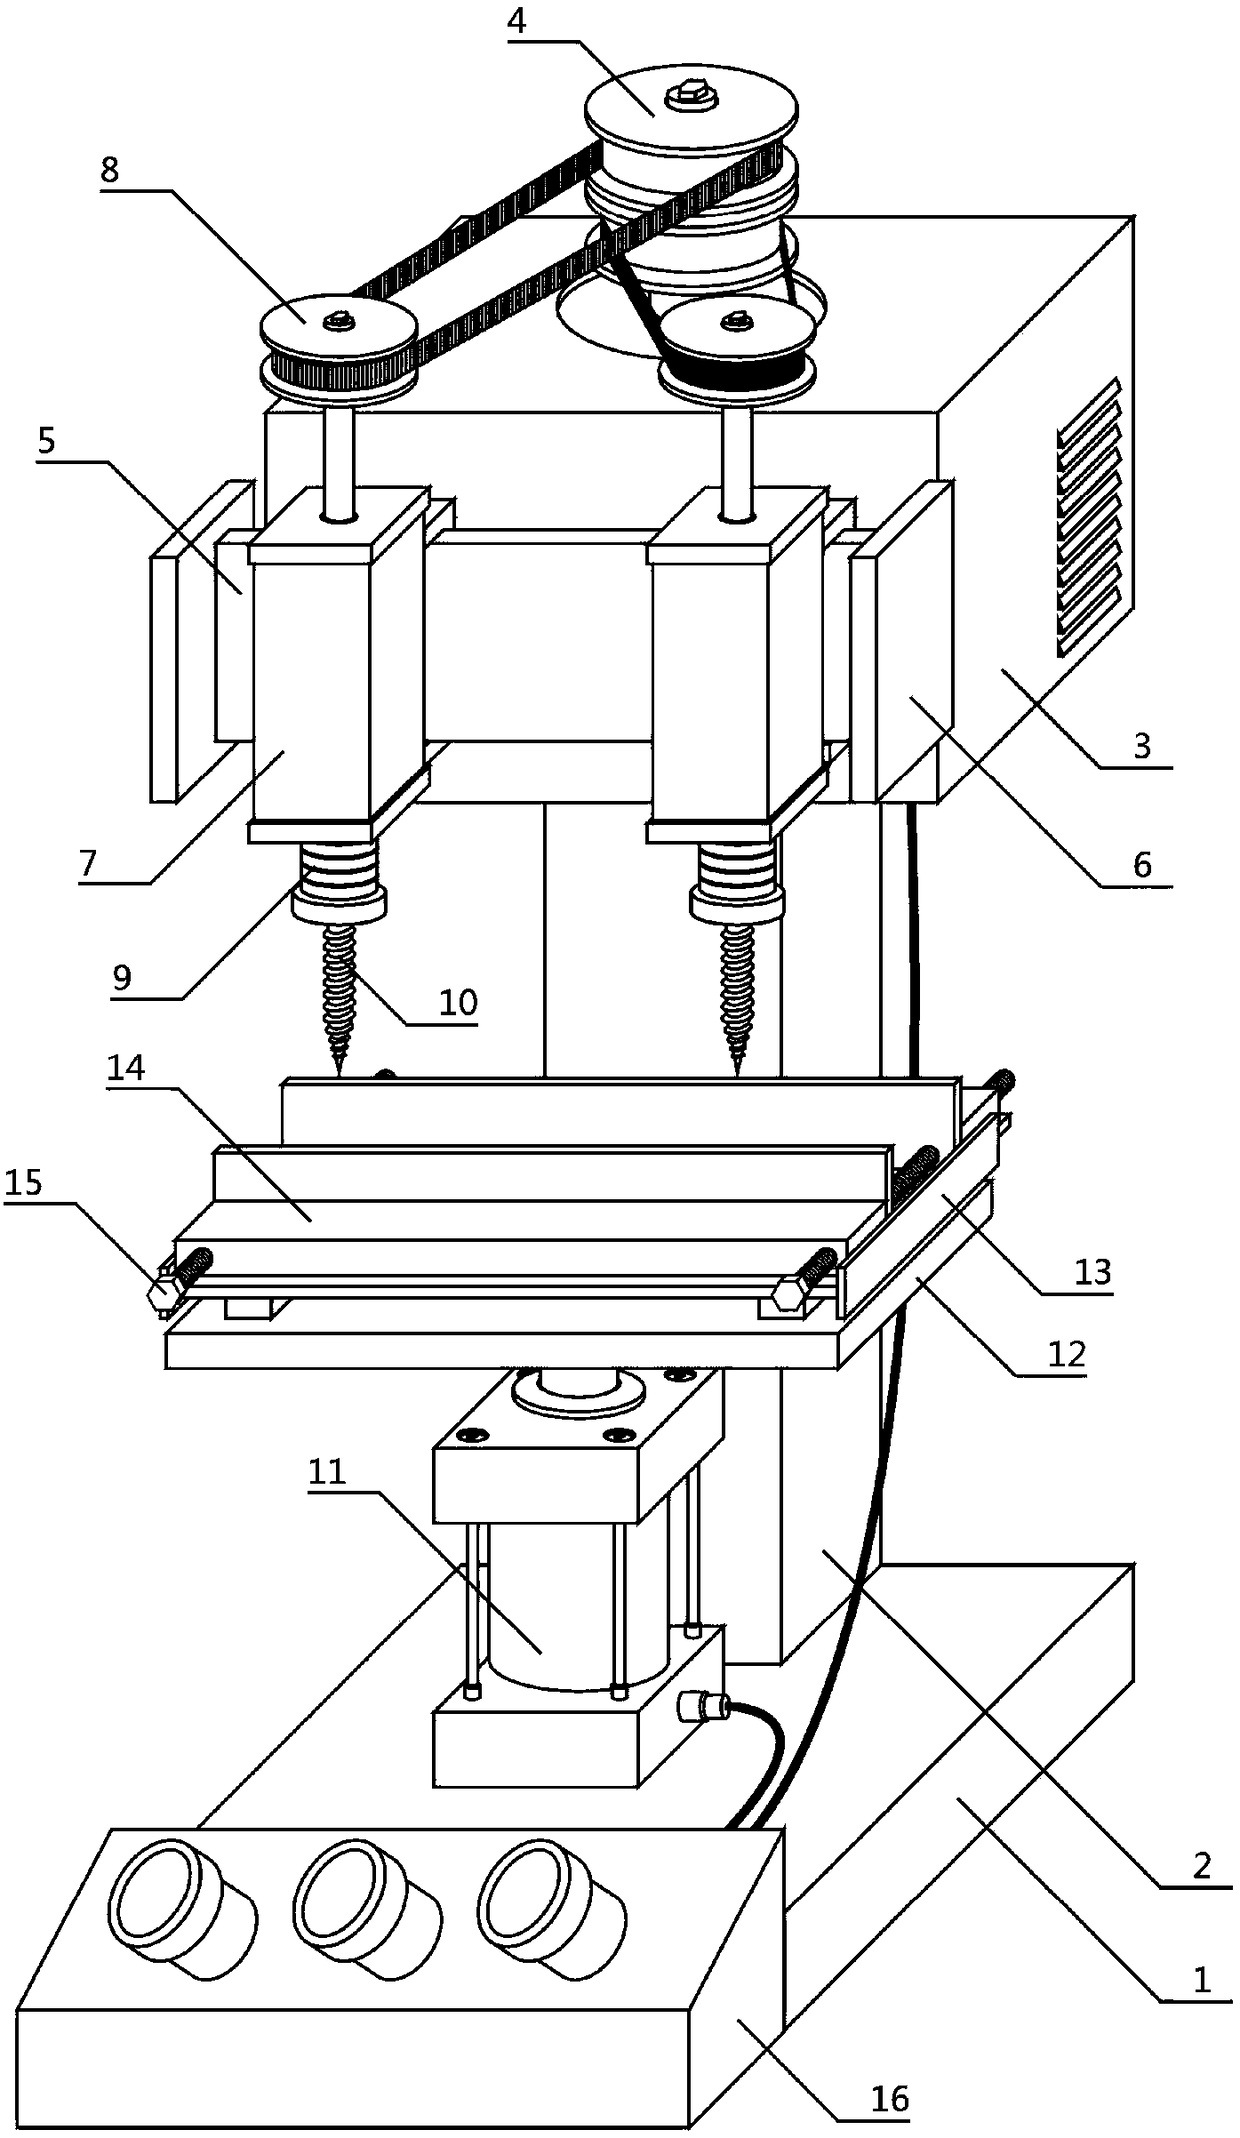 Dual-drill-head locating and drilling mechanism